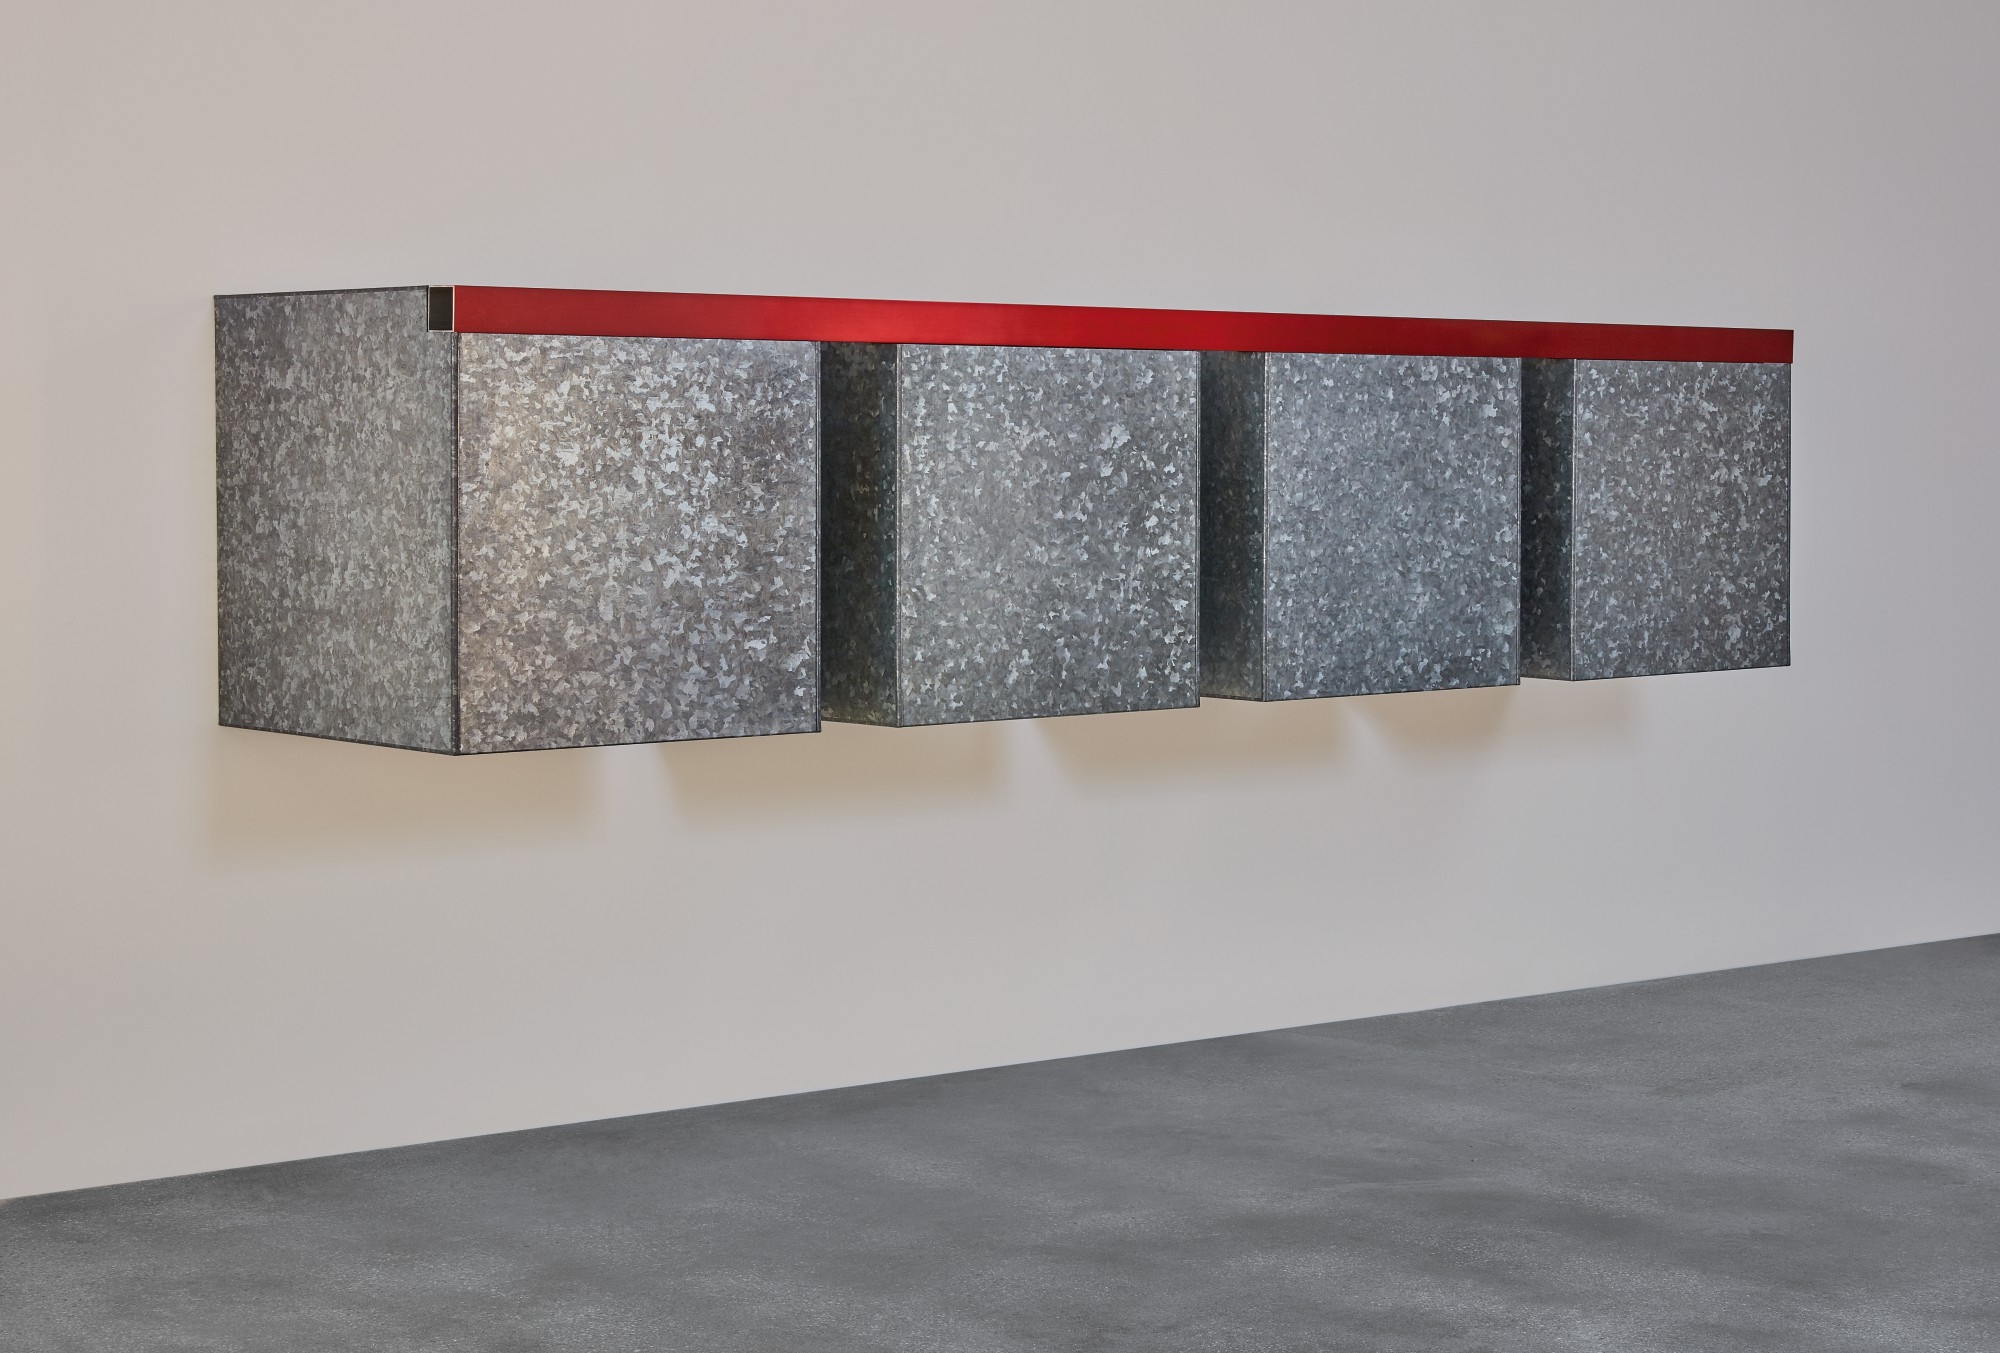 UNTITLED by Donald Judd, Executed in 1980